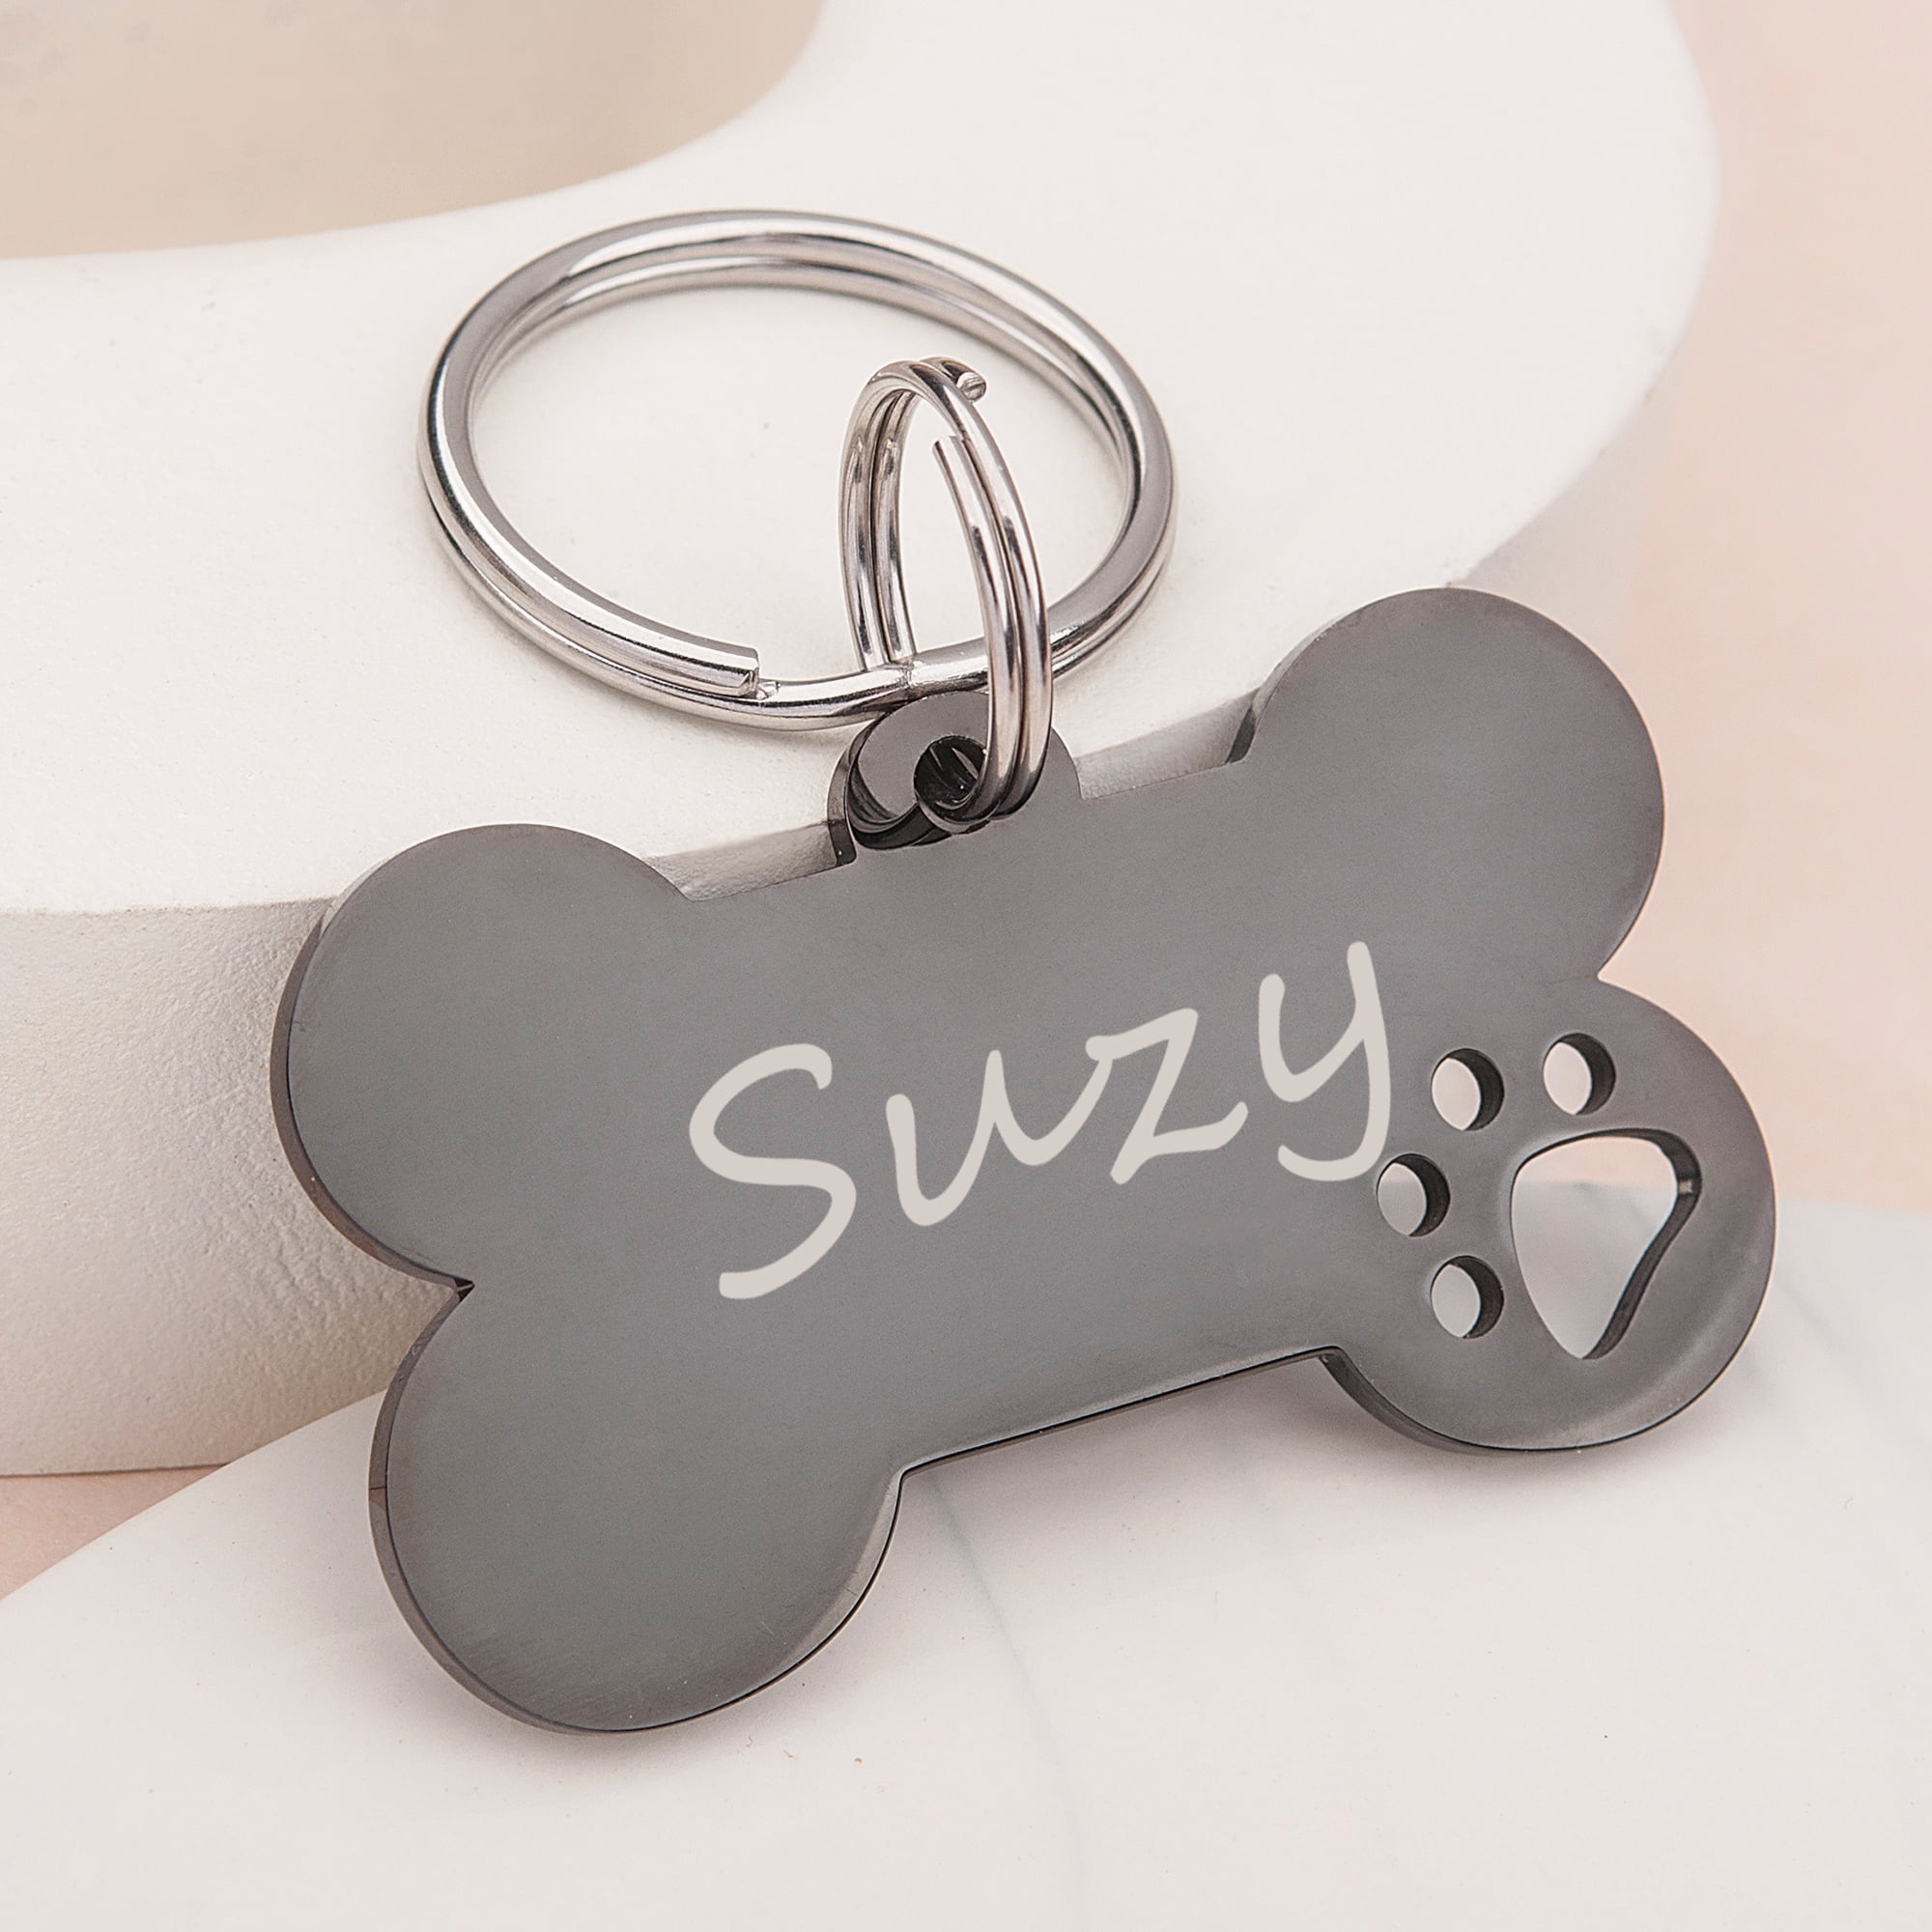 Funny Dog Tags for Dogs Personalized Land Piranha Small Cat Tag, Pet ID  Tag Charm, Silent Dog Tags, Customizable Dog Tags, Bad Dog Tag